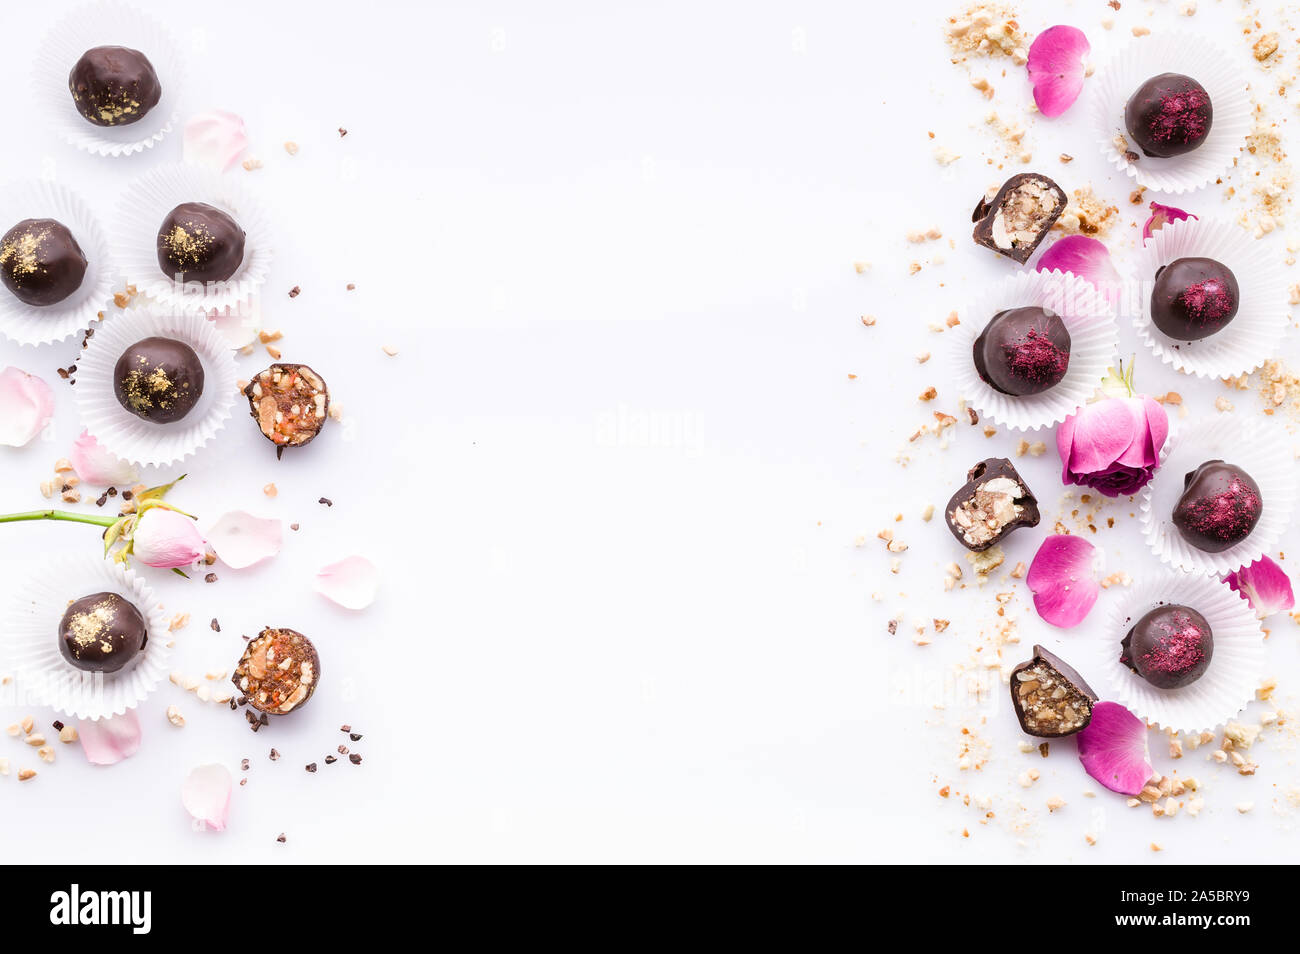 Sweet pattern. Top view handmade chocolate candies with nuts and honey. Gourmet chocolates on a white background. Close-up. Soft focus. Copy space Stock Photo